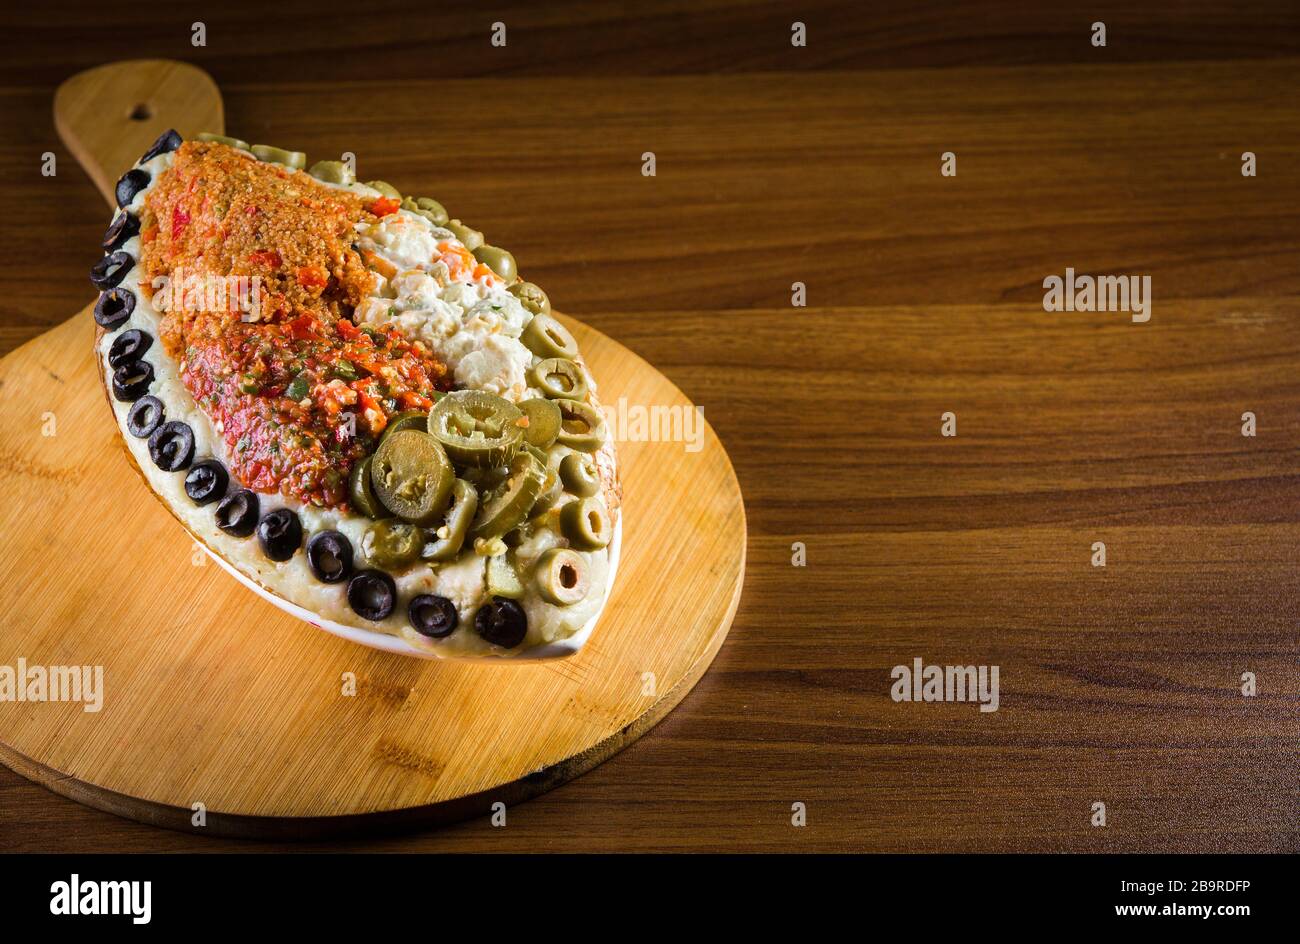 Turkish national dish called 'kumpir' which is baked potato stuffed with vegetables Stock Photo